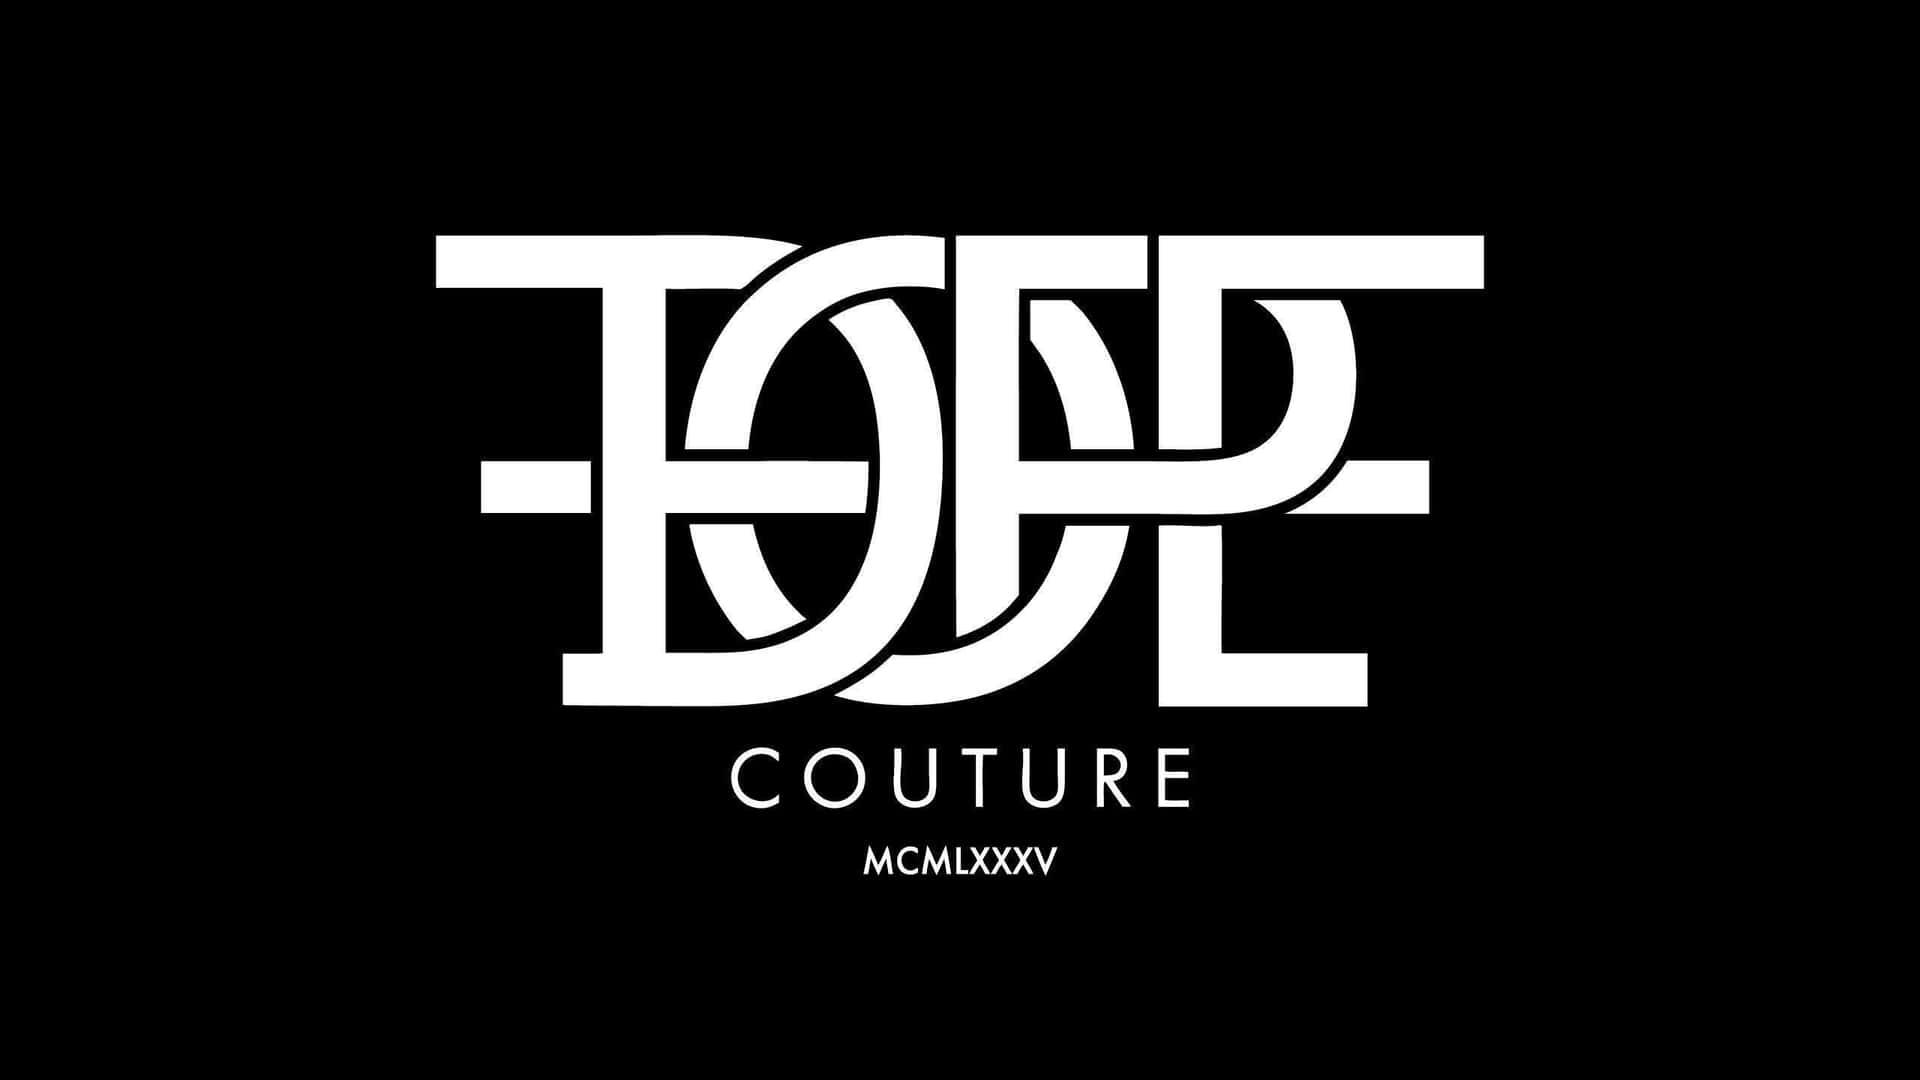 A Black And White Logo For The Fashion Label Couture Wallpaper